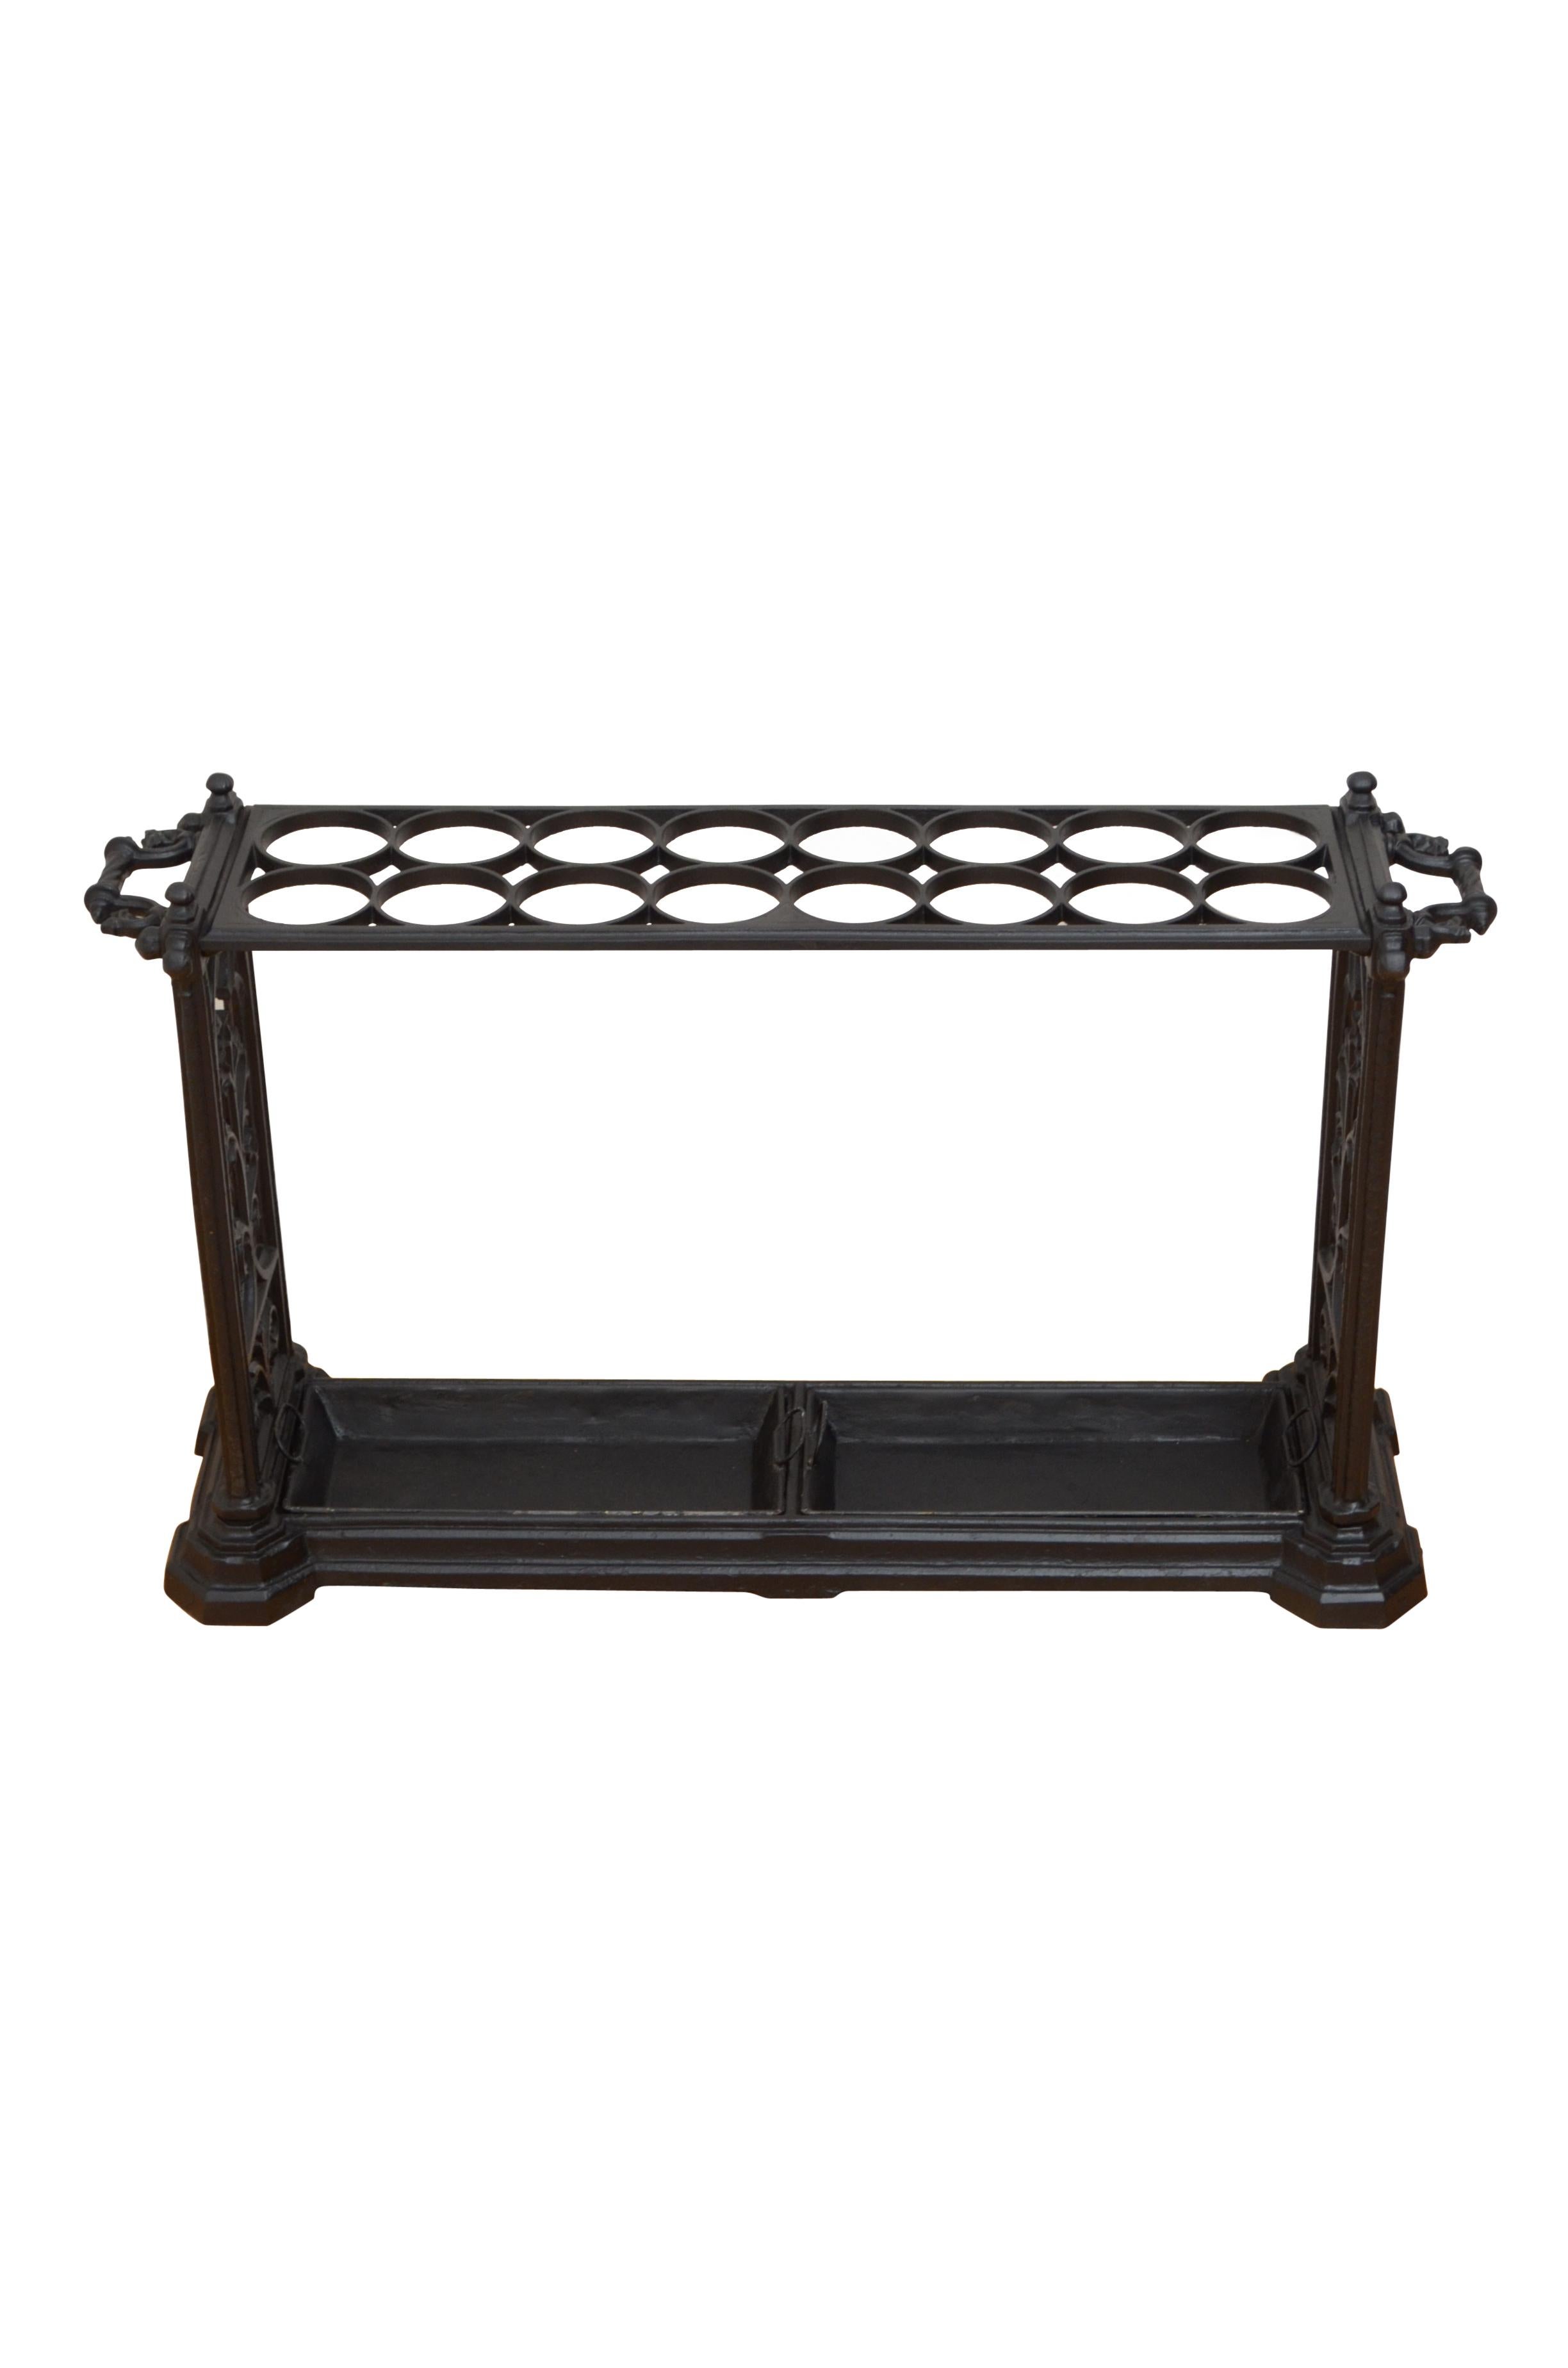 K0548 A large Gothic Revival Victorian cast iron umbrella stand / hall stand, having two row of eight umbrella compartments flanked by decorative finals and handles, supported on gothic design uprights terminating in stepped base with two removable